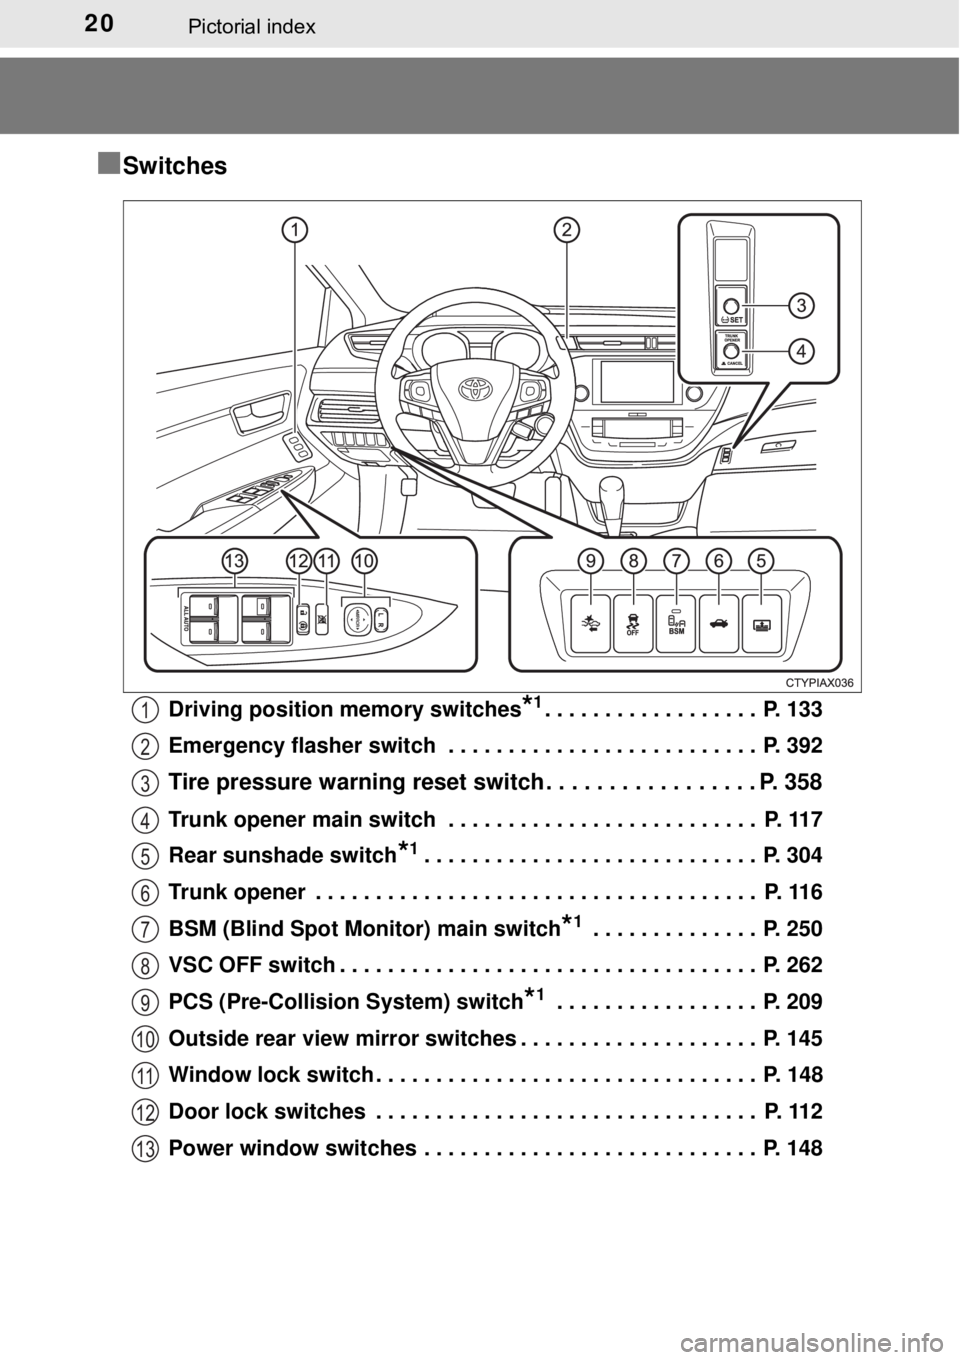 TOYOTA AVALON HYBRID 2018  Owners Manual (in English) 20Pictorial index
■Switches
Driving position memory switches*1. . . . . . . . . . . . . . . . . .  P. 133
Emergency flasher switch  . . . . . . . . . . . . . . . . . . . . . . . . . .  P. 392
Tire p